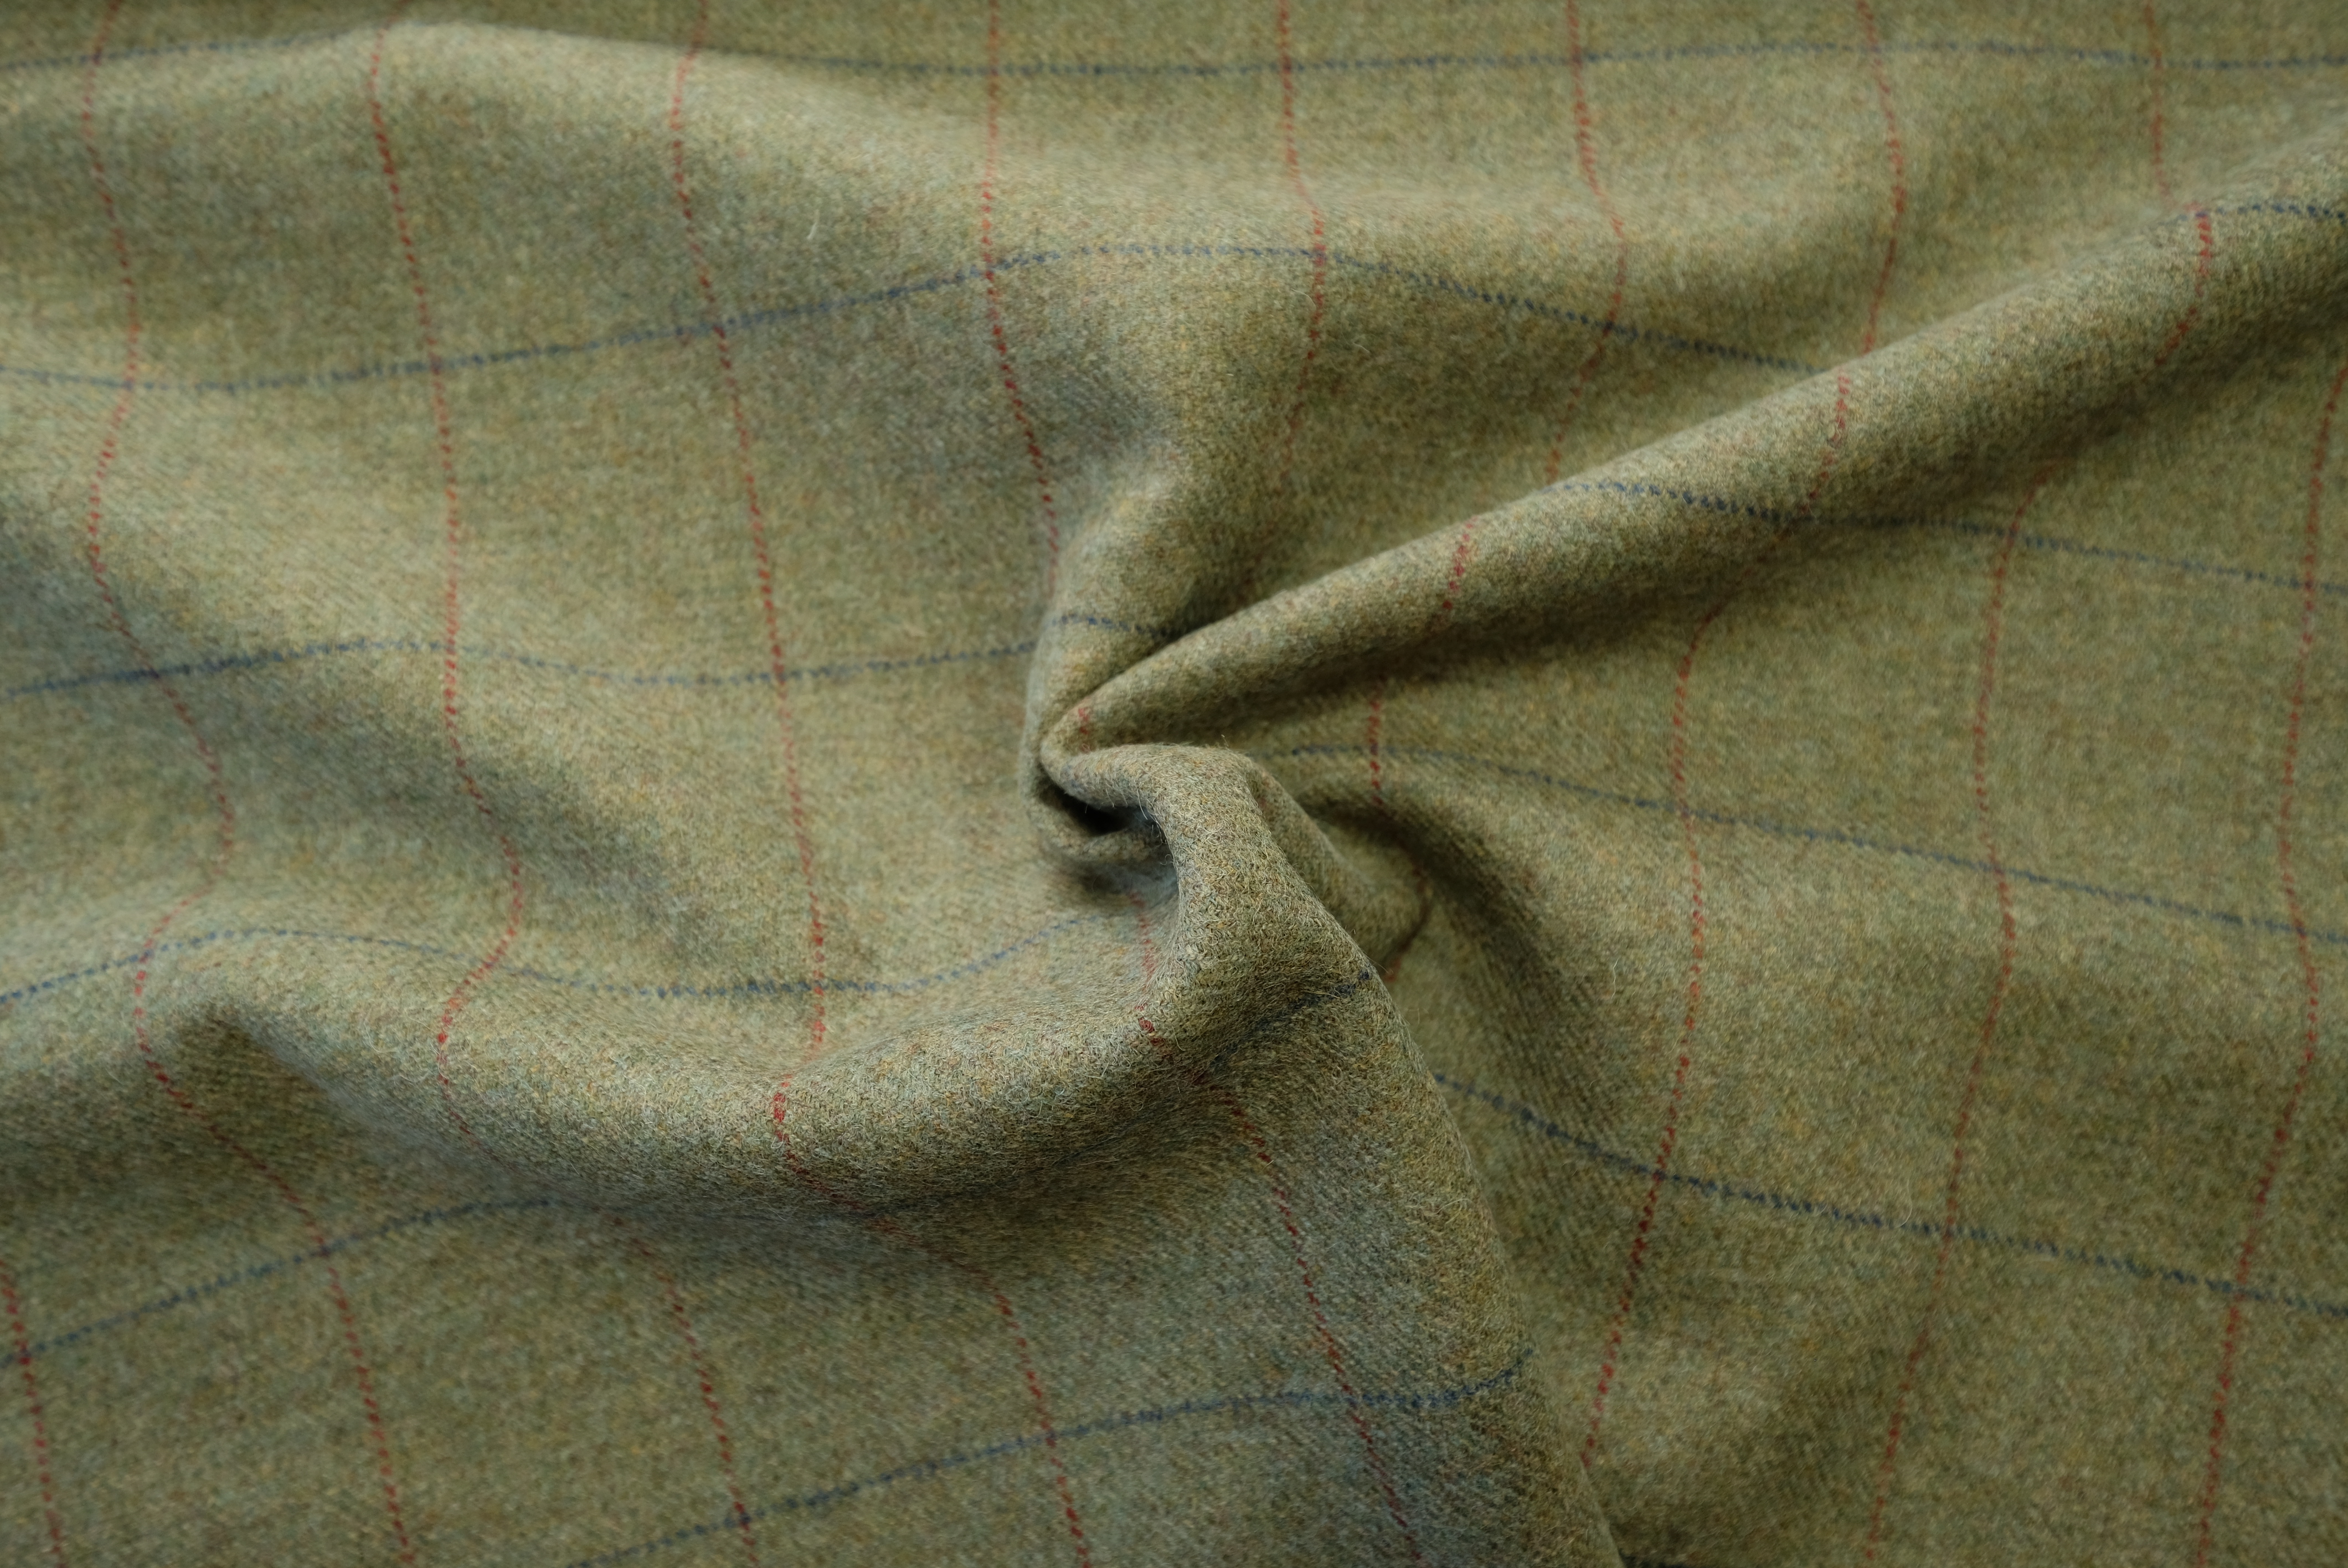 TWEED tartan wool fabric-gray green with red and blue 01